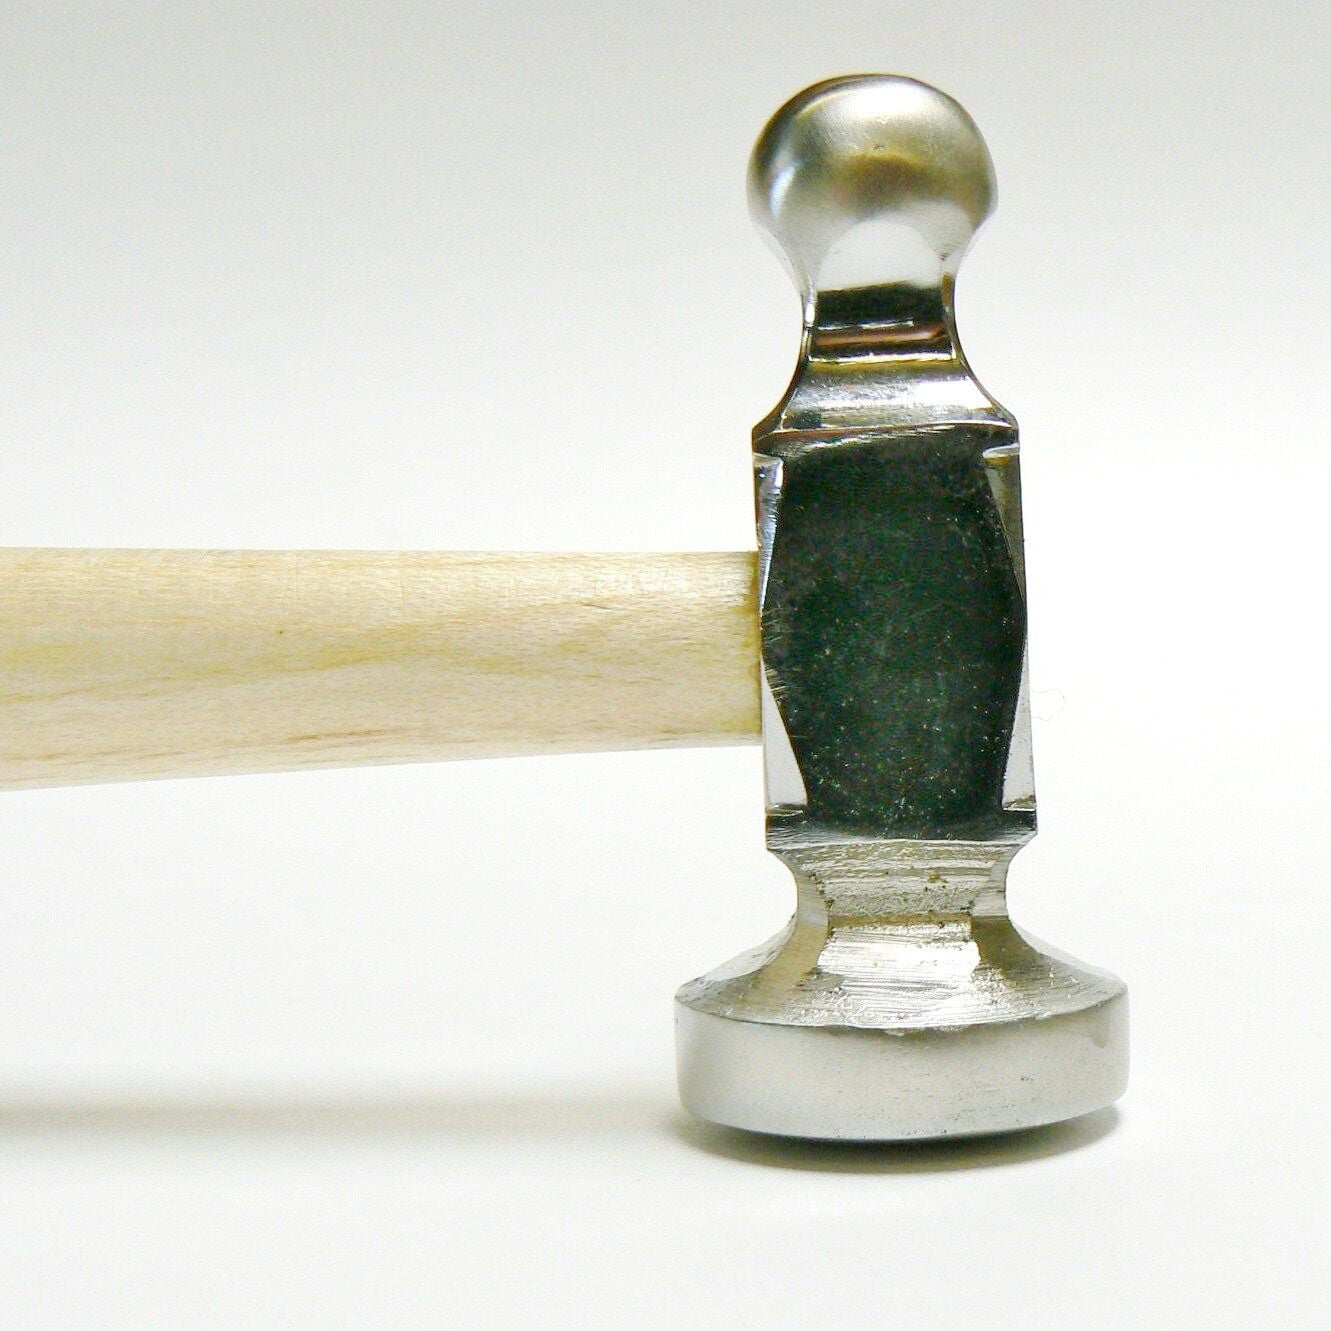 Chasing Hammer 1 Full Domed Face Jewelry Crafts Metal Forming Jewelers  Hammer by JTS